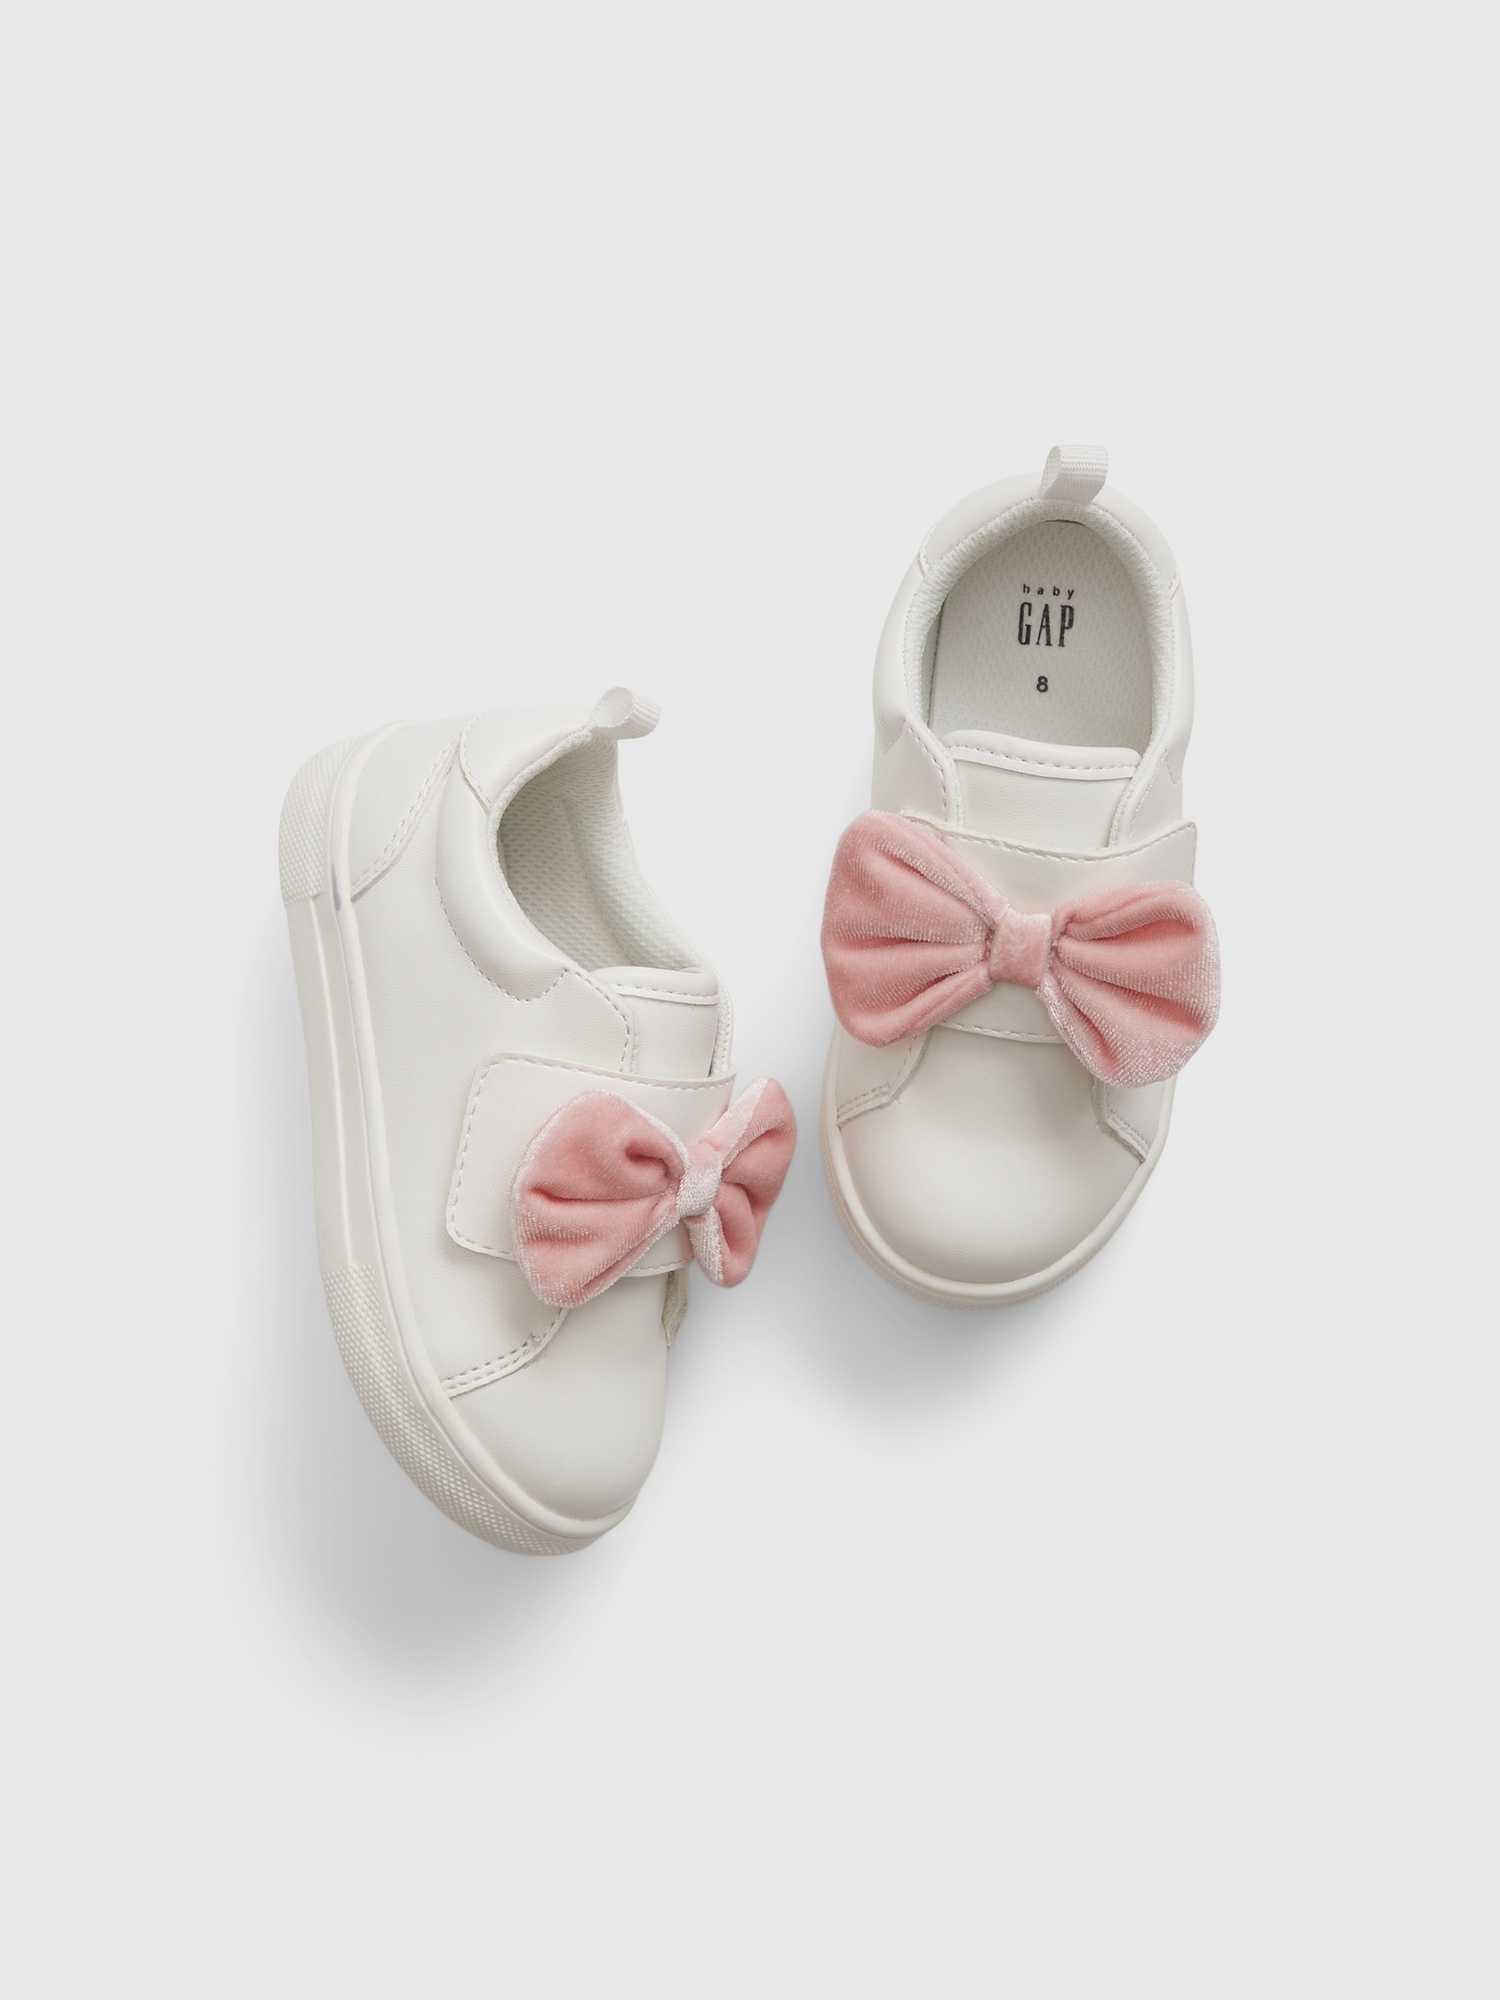 Gap Toddler Fuzzy Bow Sneakers